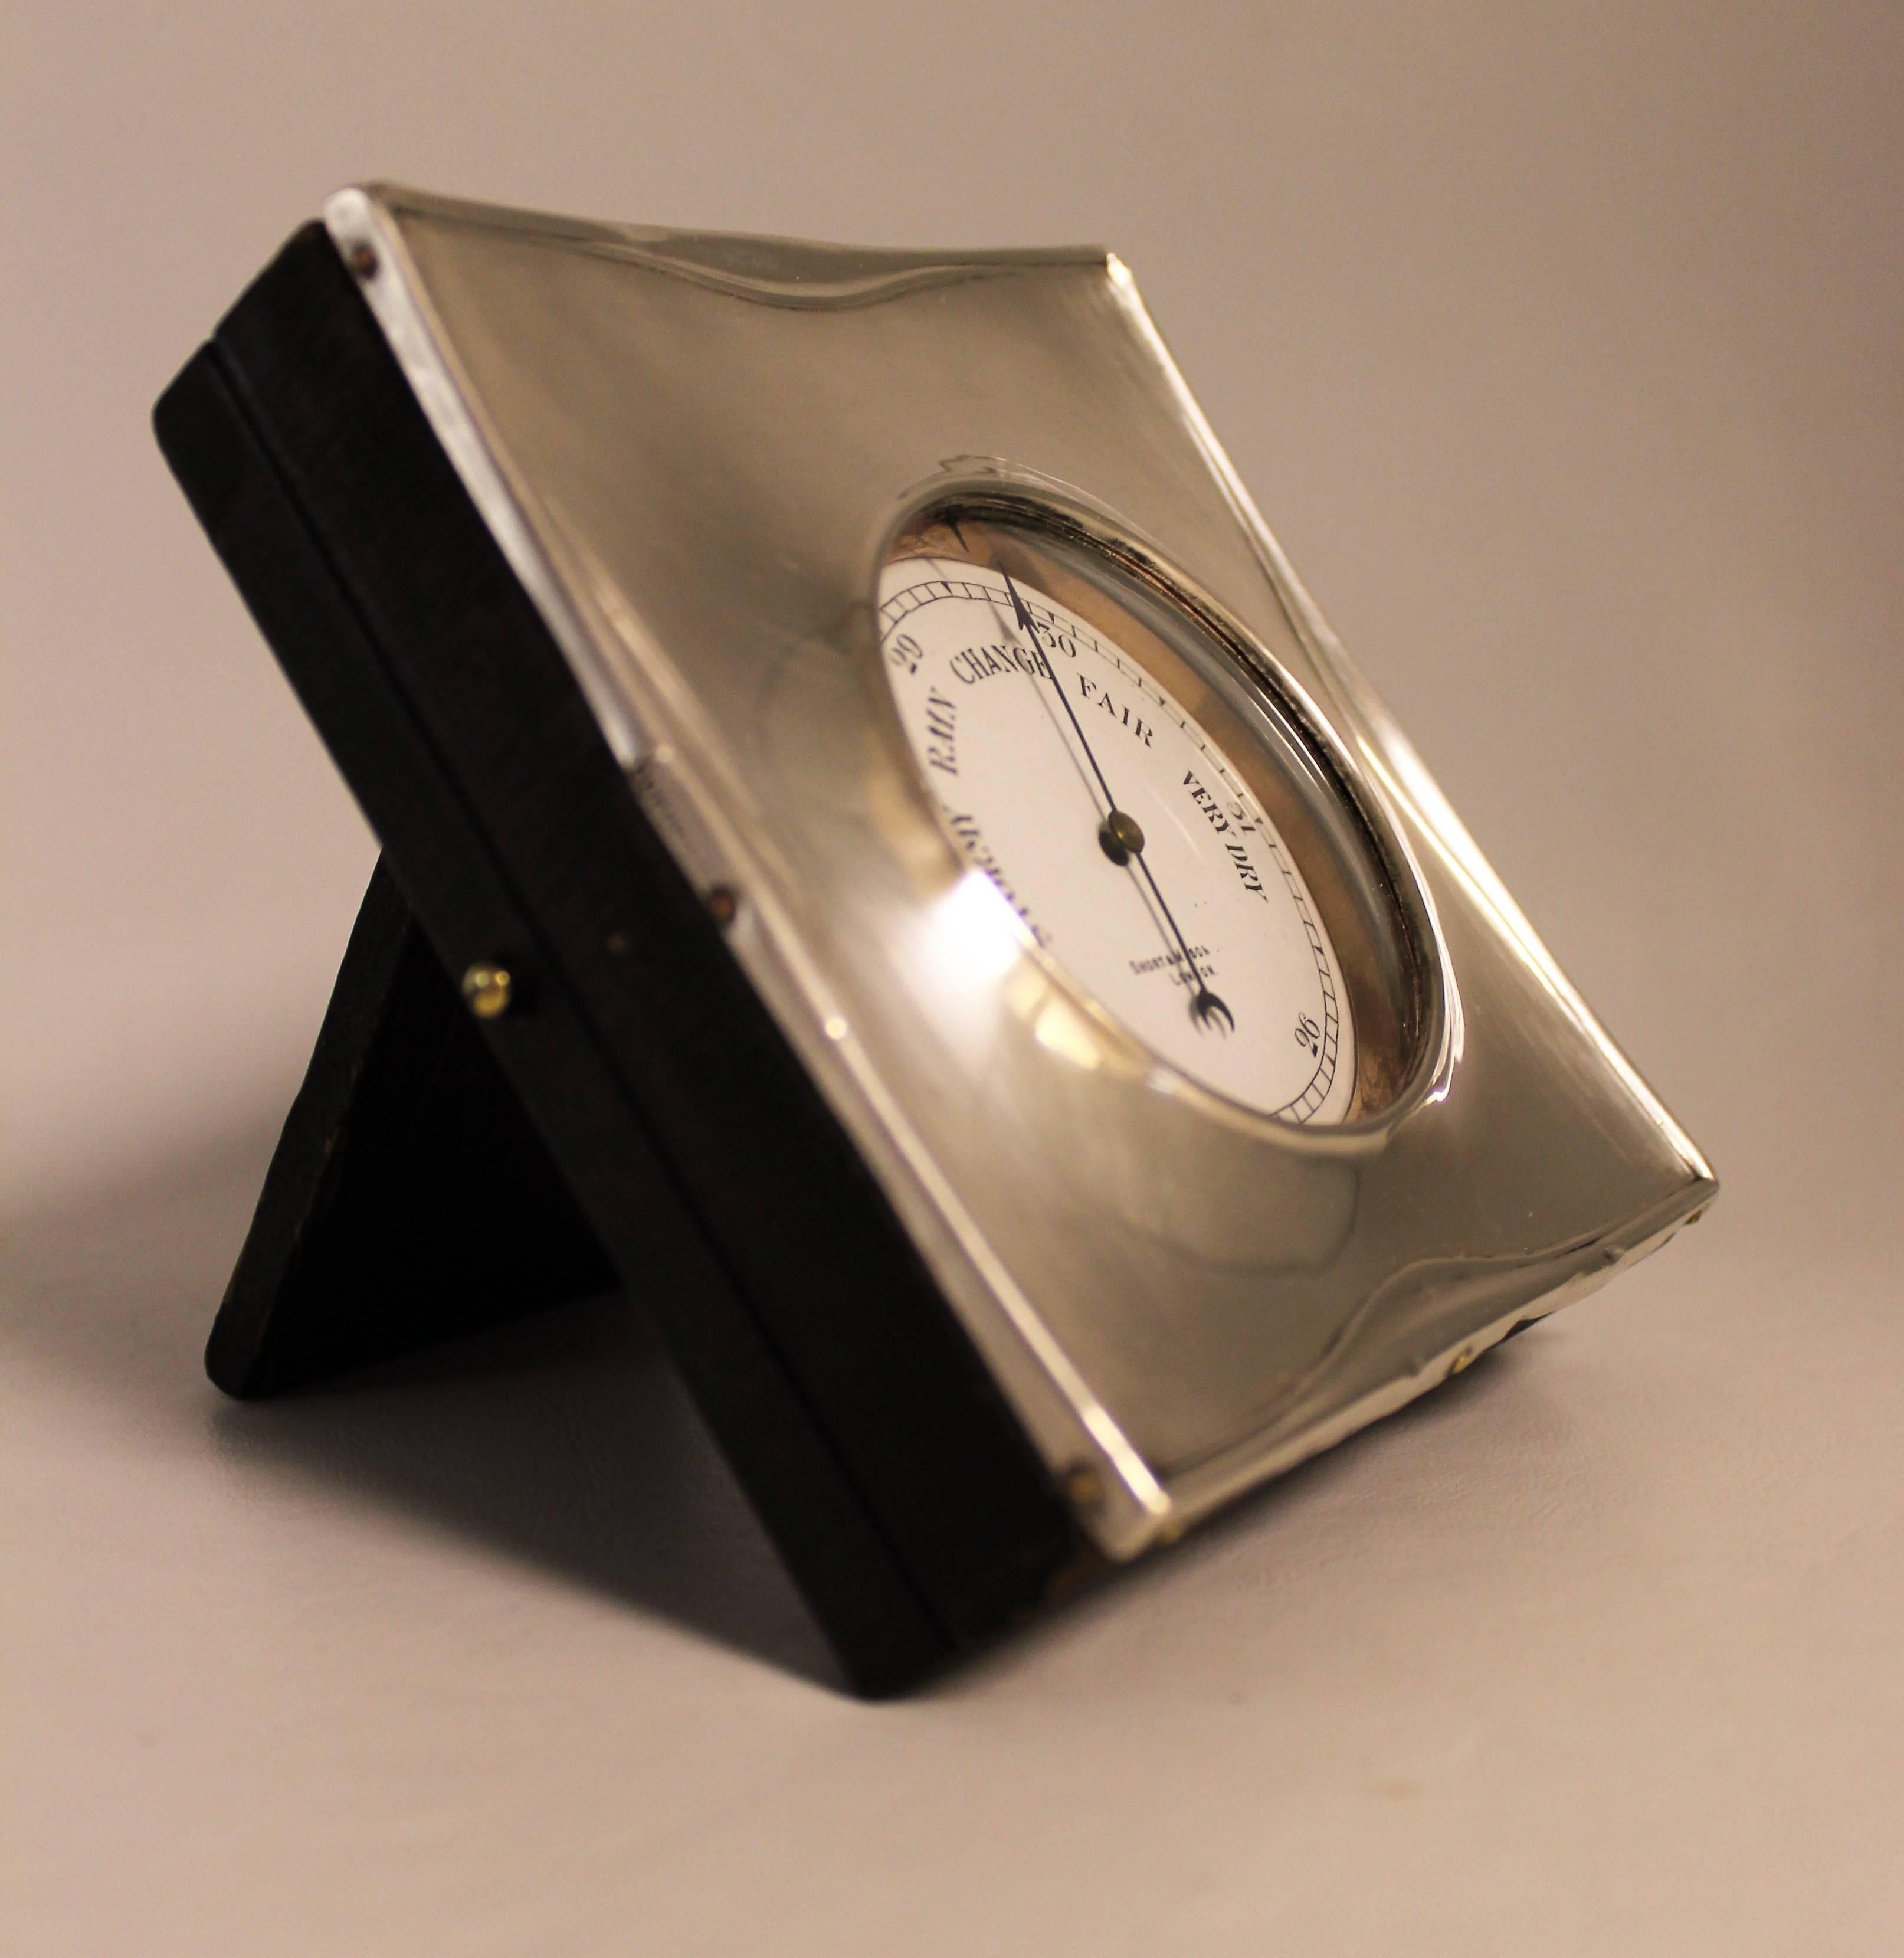 Silver plated Short & Mason barometer in sterling silver case by W G Sothers & Co.